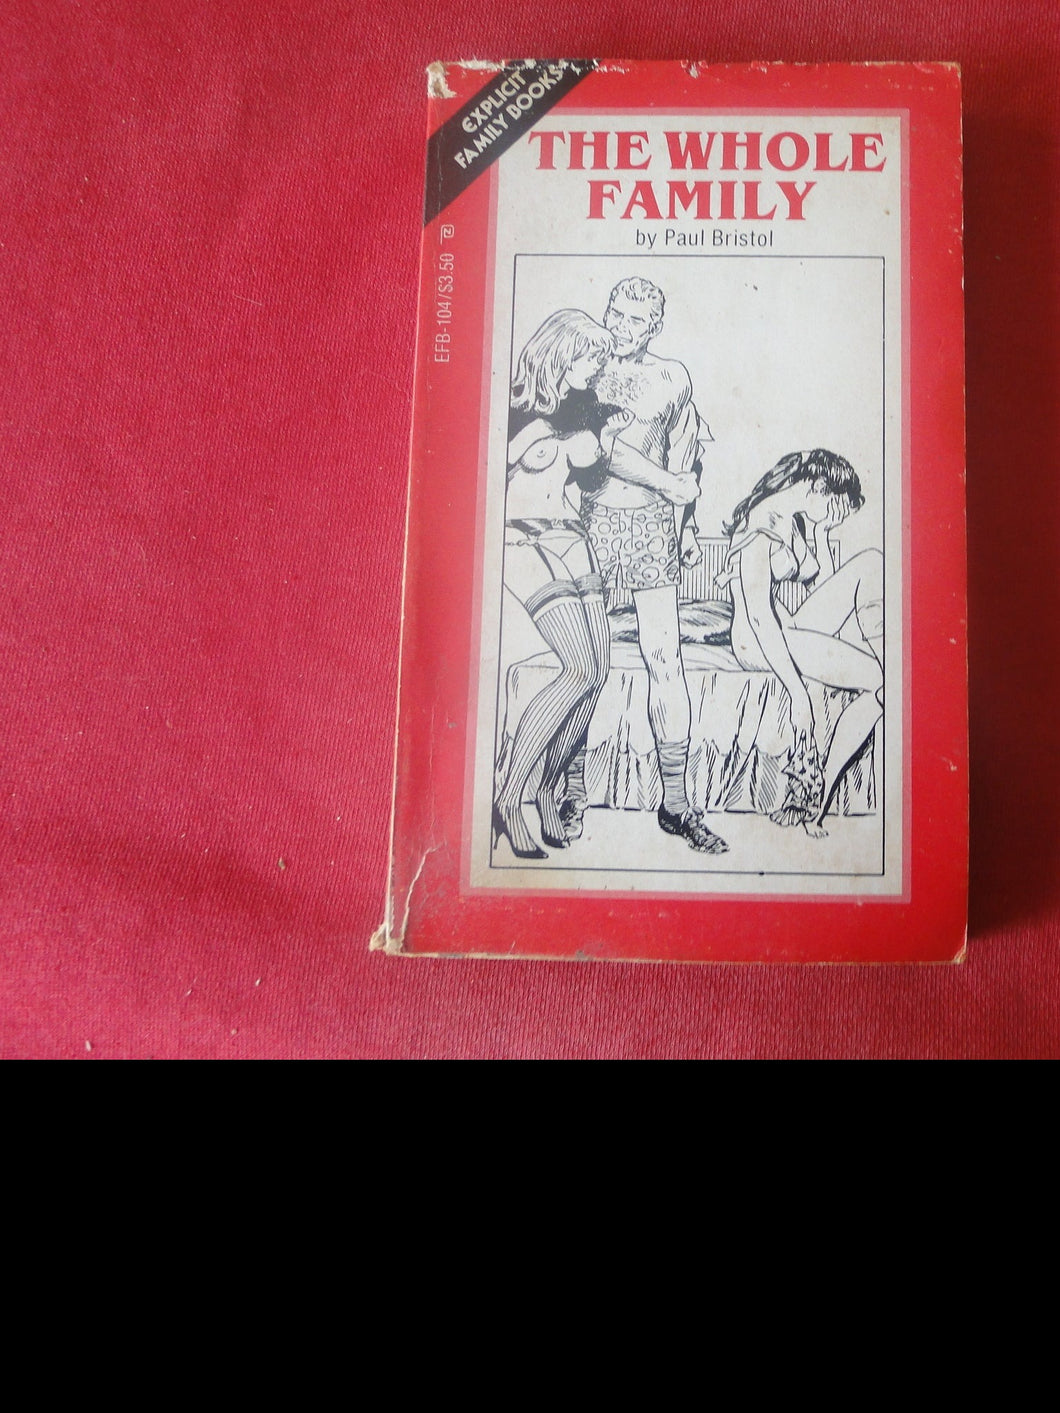 Vintage Adult Paperback Novel/Book The Whole Family ROUGH          PB5